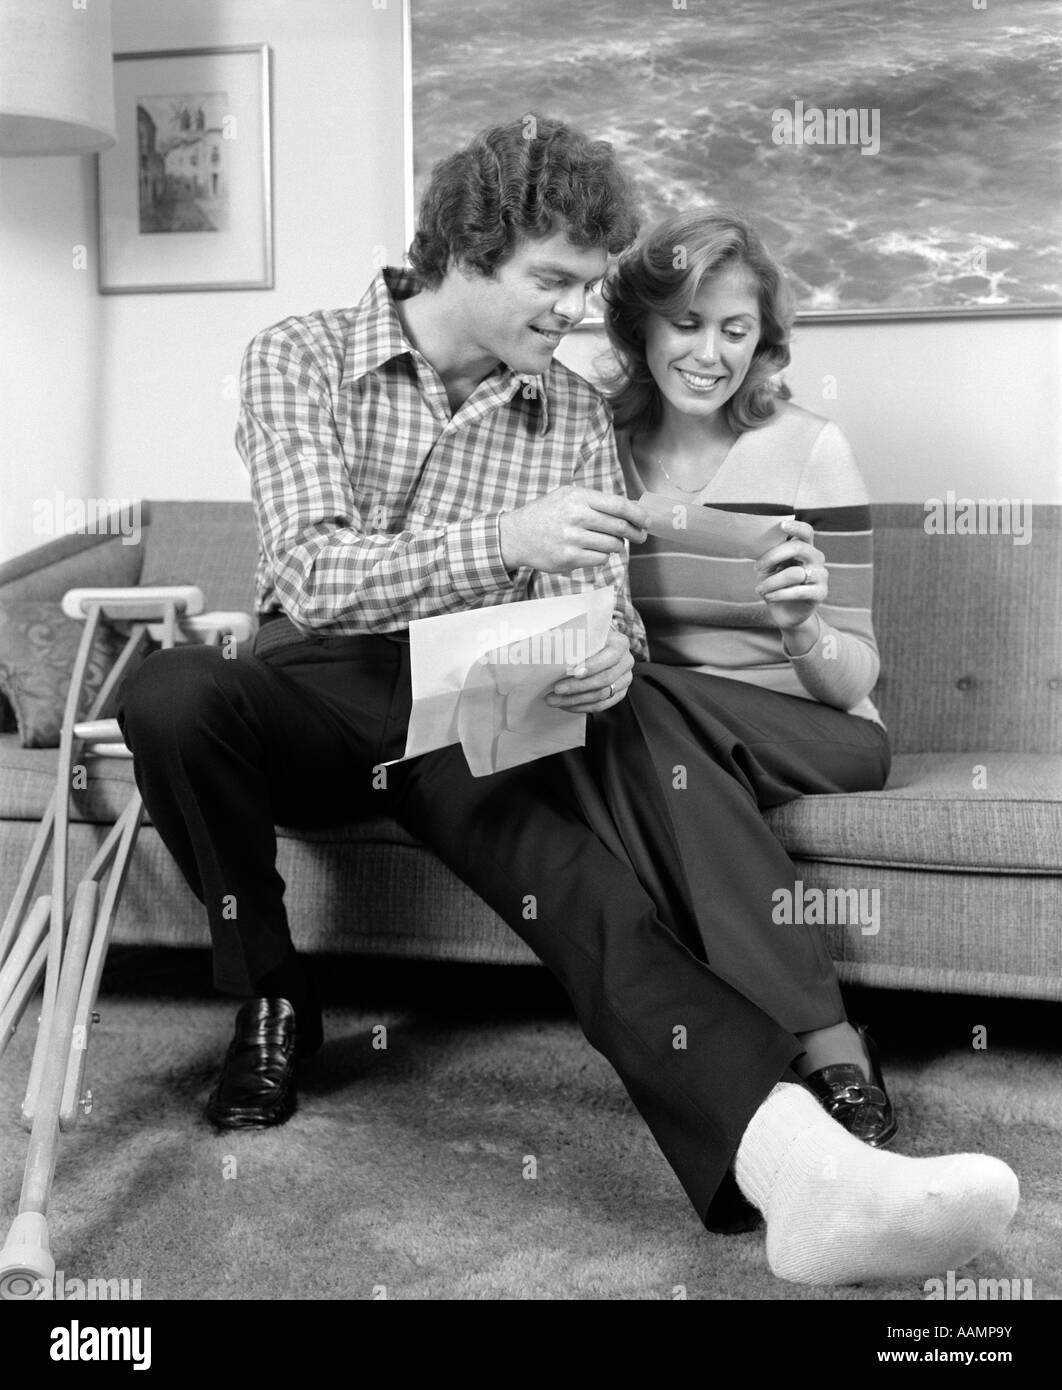 1970s MAN AND WOMAN BROKEN FOOT ON STOOL CRUTCHES SMILING AT INSURANCE CHECK Stock Photo